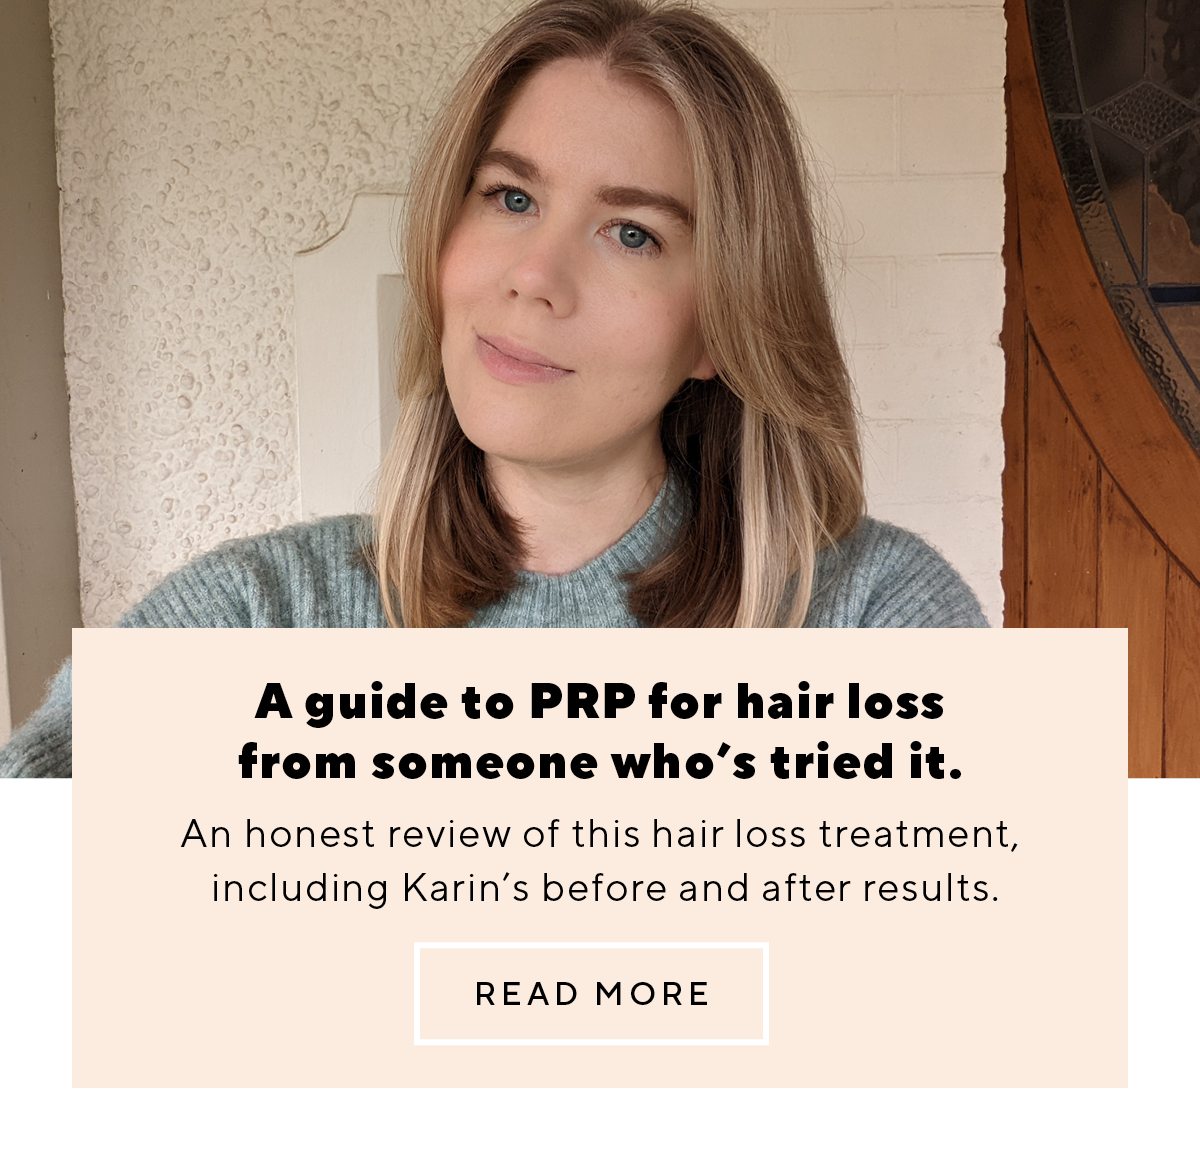 A guide to PRP for hair loss from someone who’s tried it.